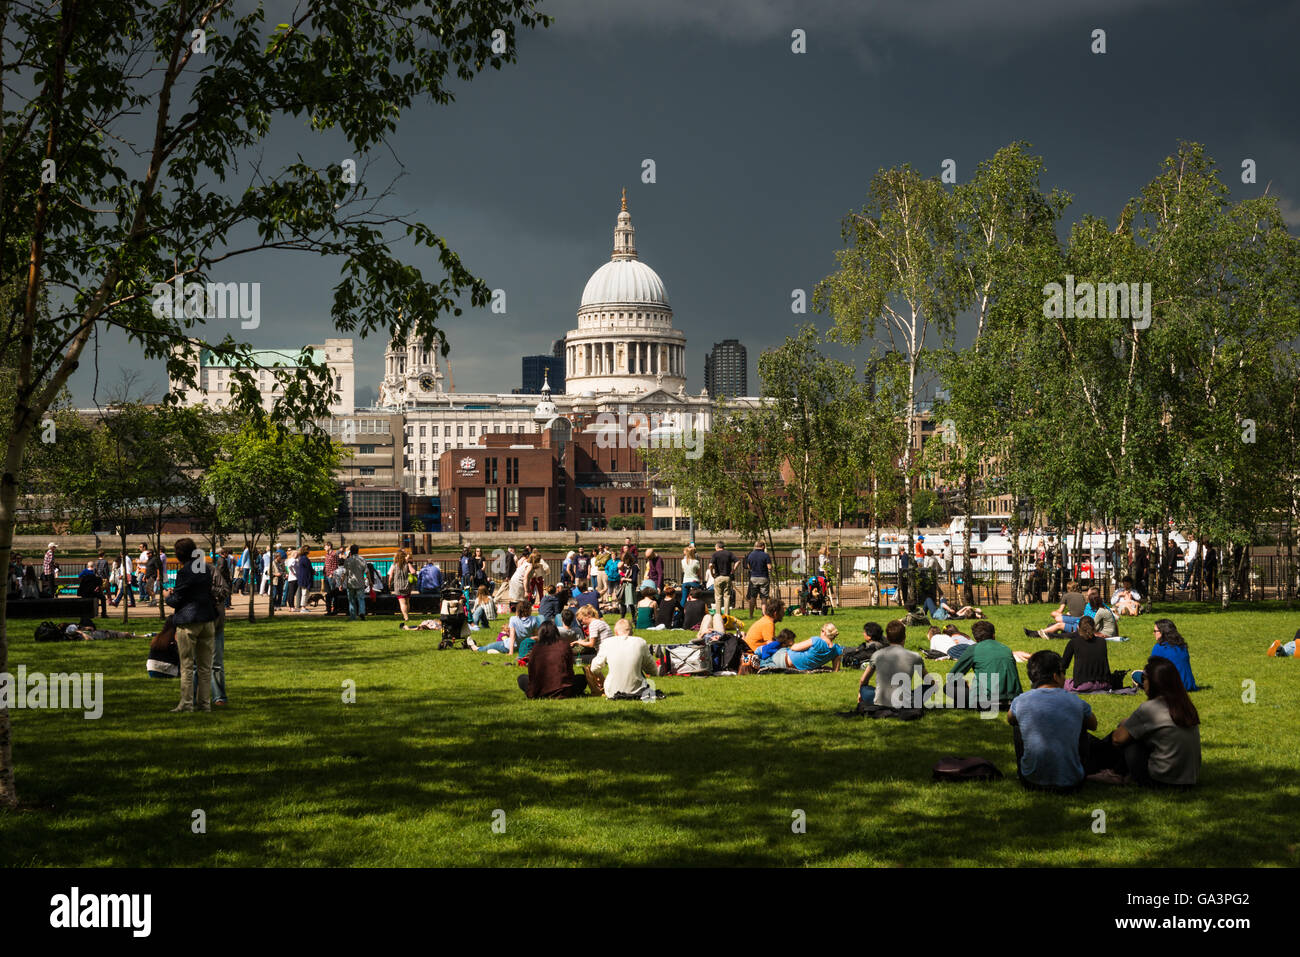 London, United Kingdom - June 25, 2016: St Pauls and a park in front of Tate Modern, moody sky seconds before a storm Stock Photo